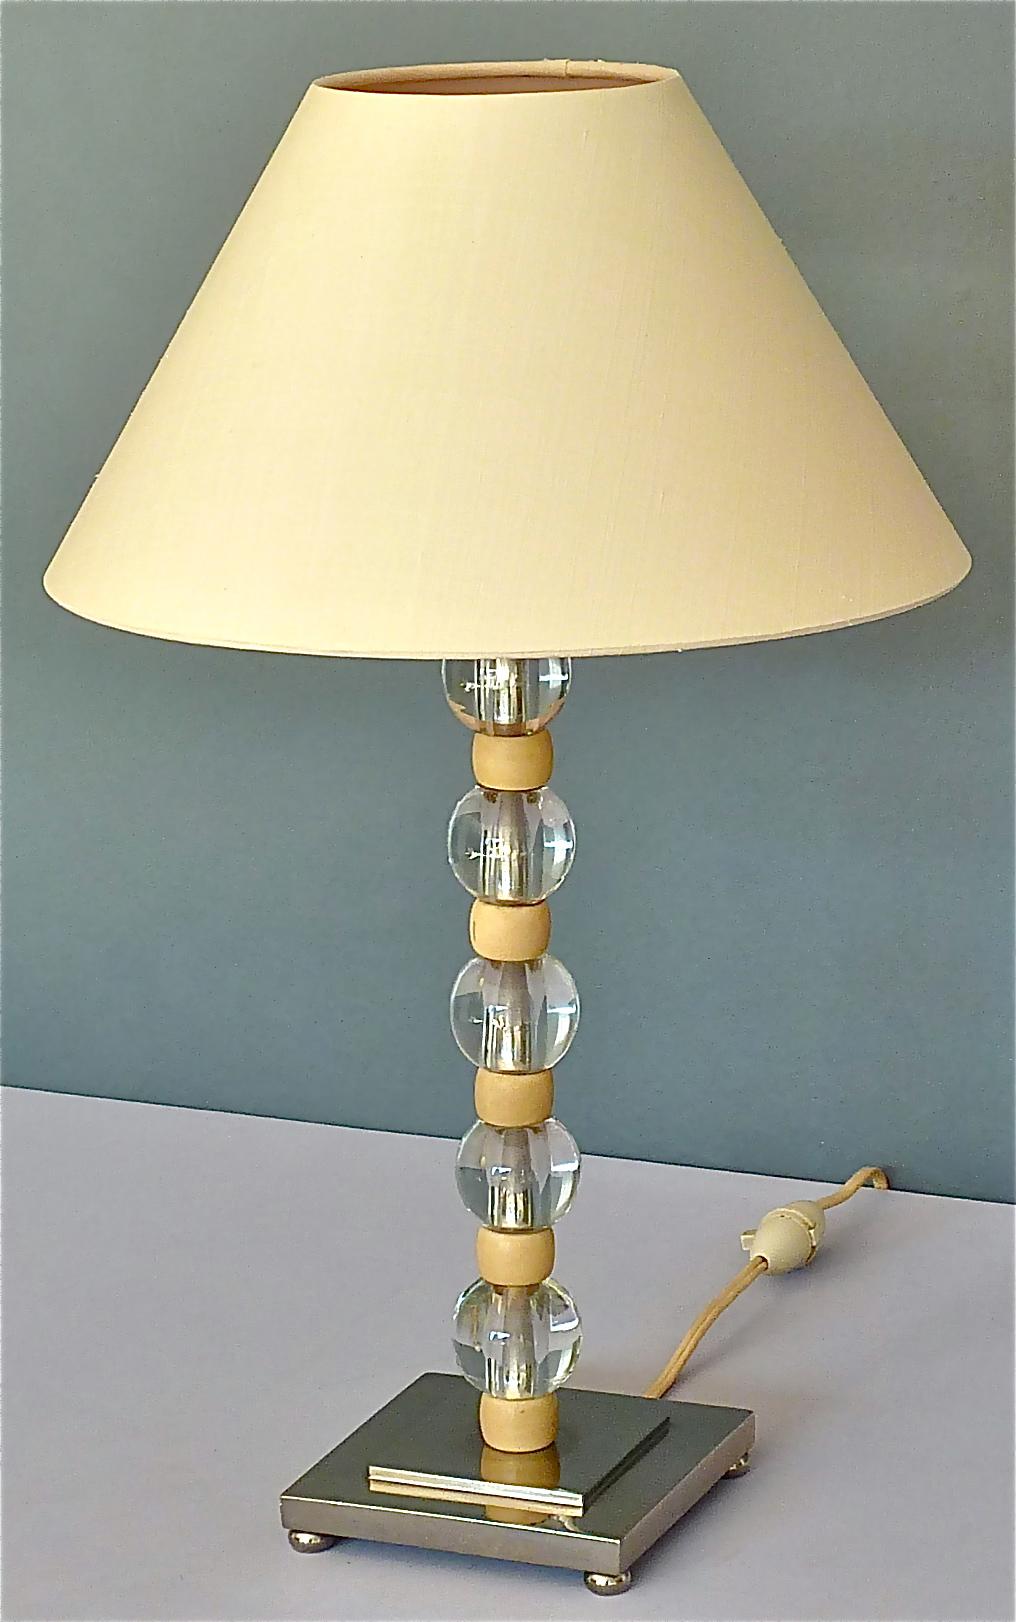 French Art Deco Adnet Baccarat Style Table Lamp Chrome Glass Ivory Color 1930s For Sale 5